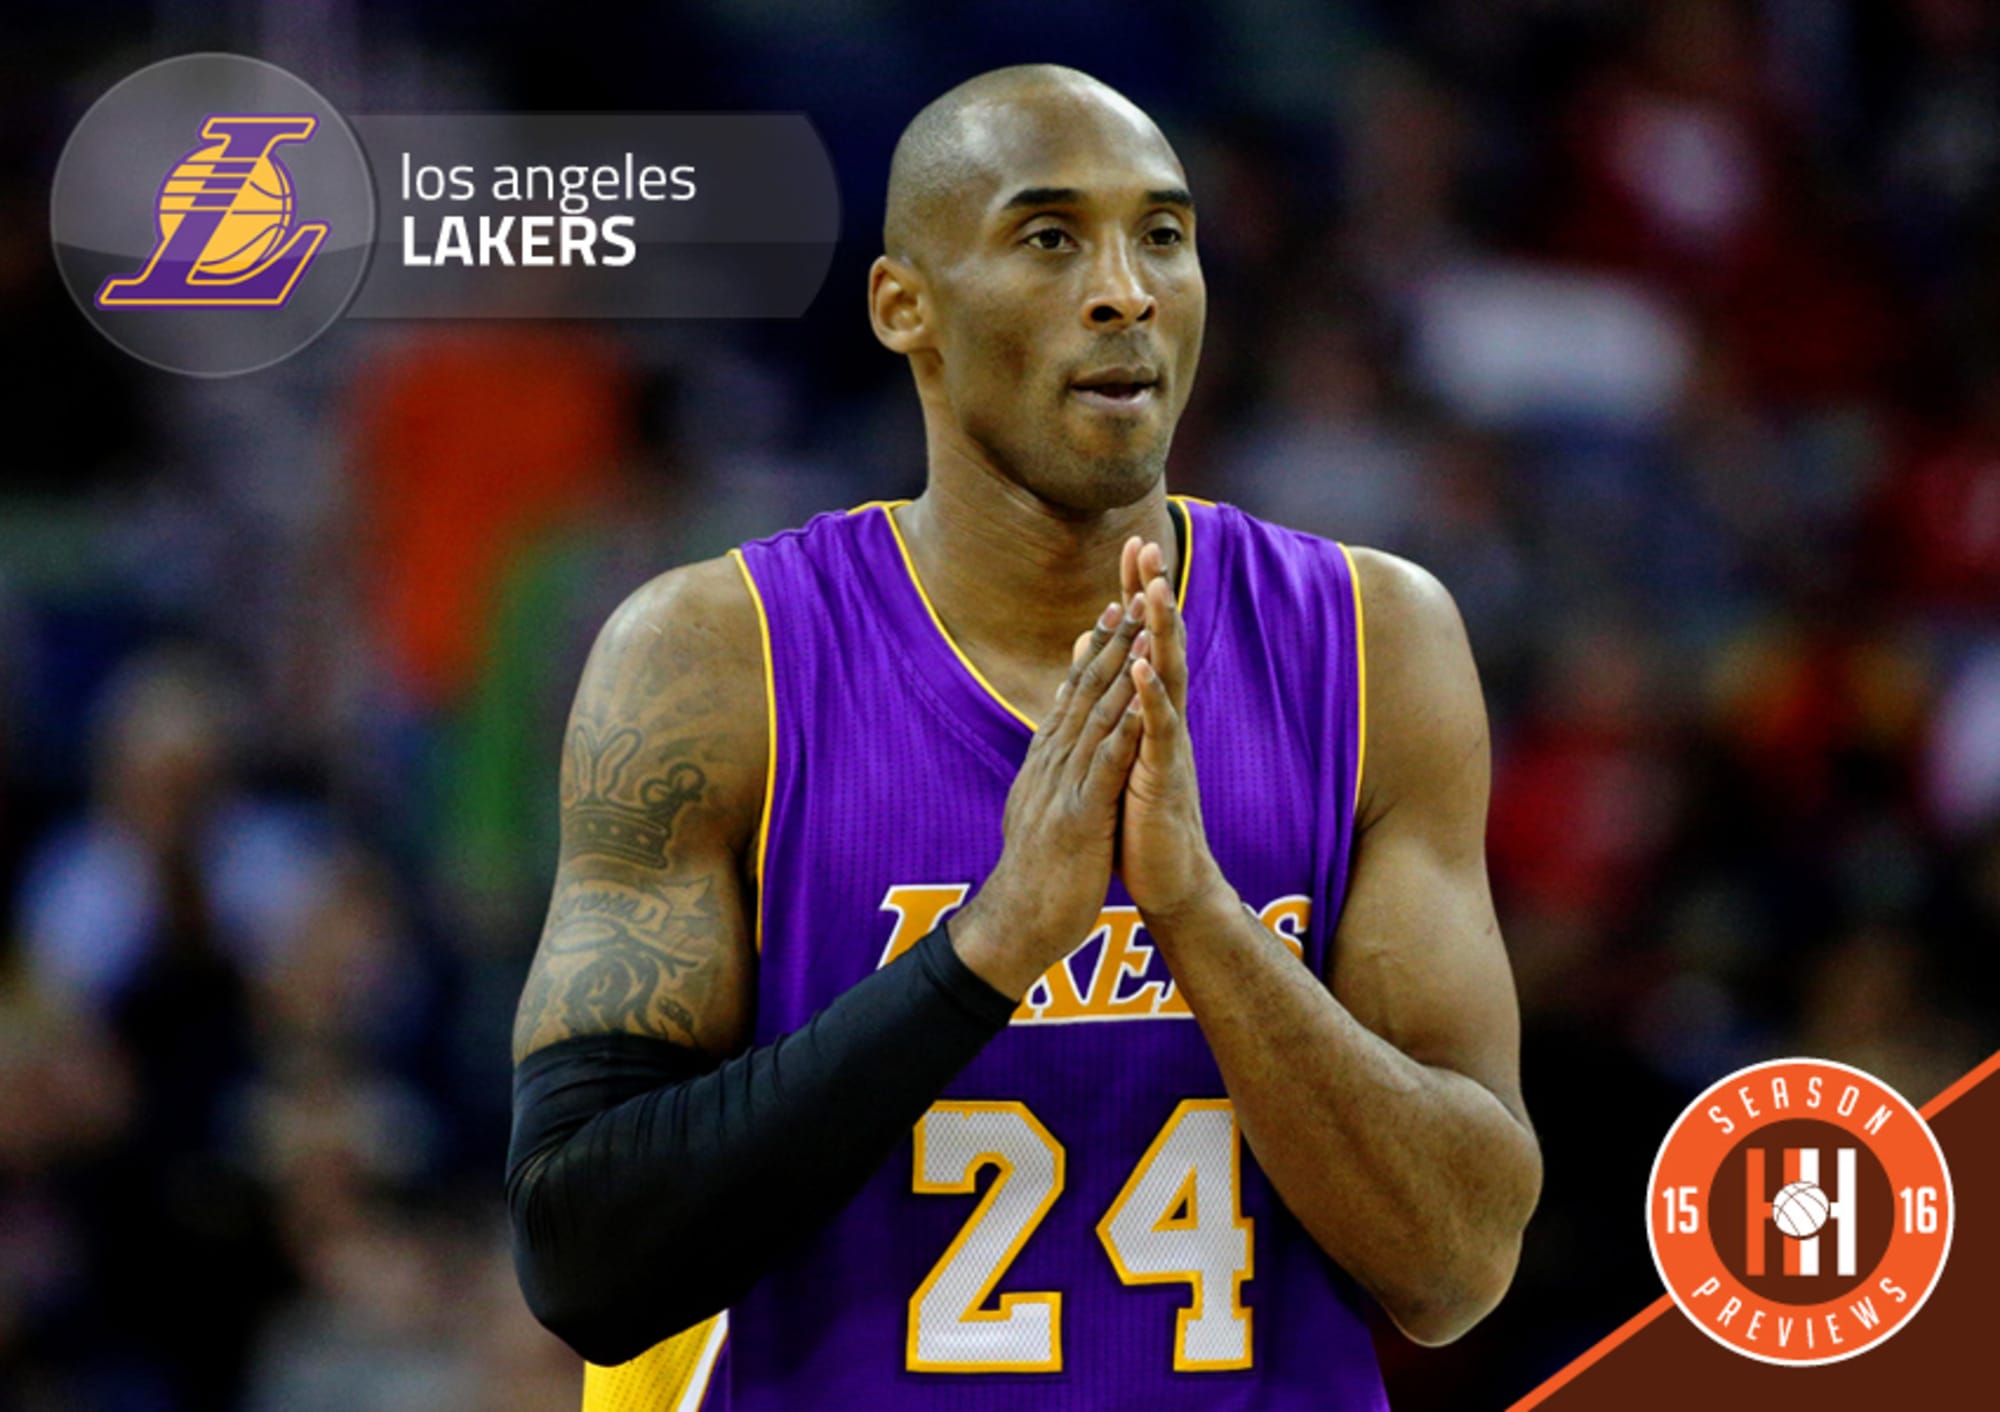 2015-16 Los Angeles Lakers Full Season Preview, Record Prediction, &  Projected Stat Leaders